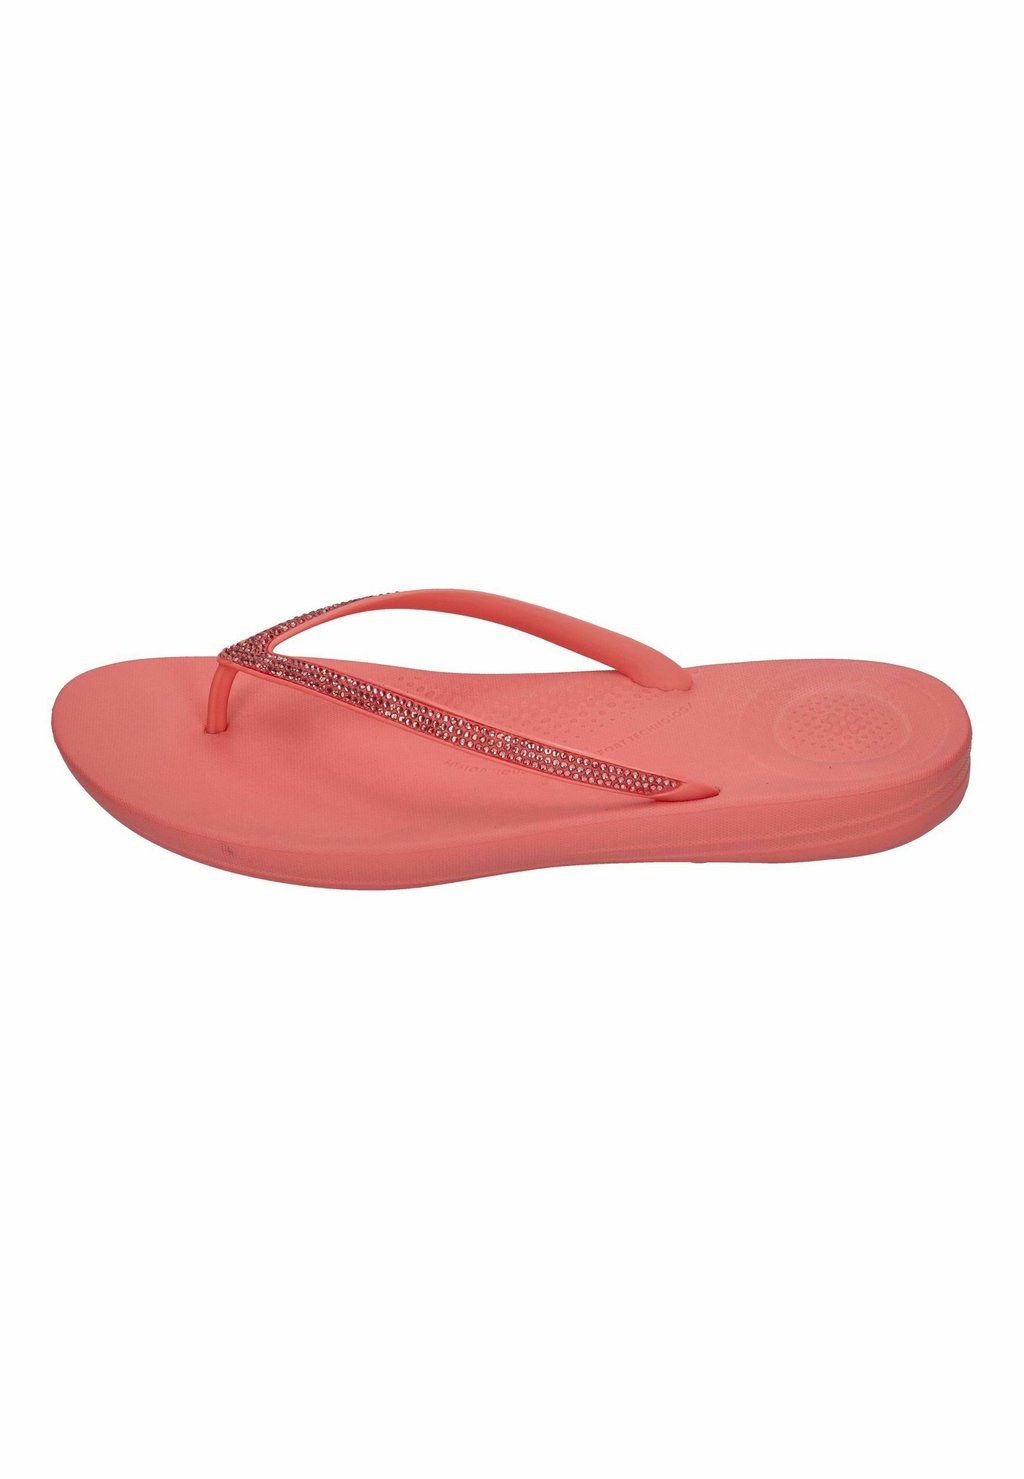 rosy lily Сандалии ZEHENTRENNER IQUSHION SPARKLE R08 FitFlop, цвет rosy coral